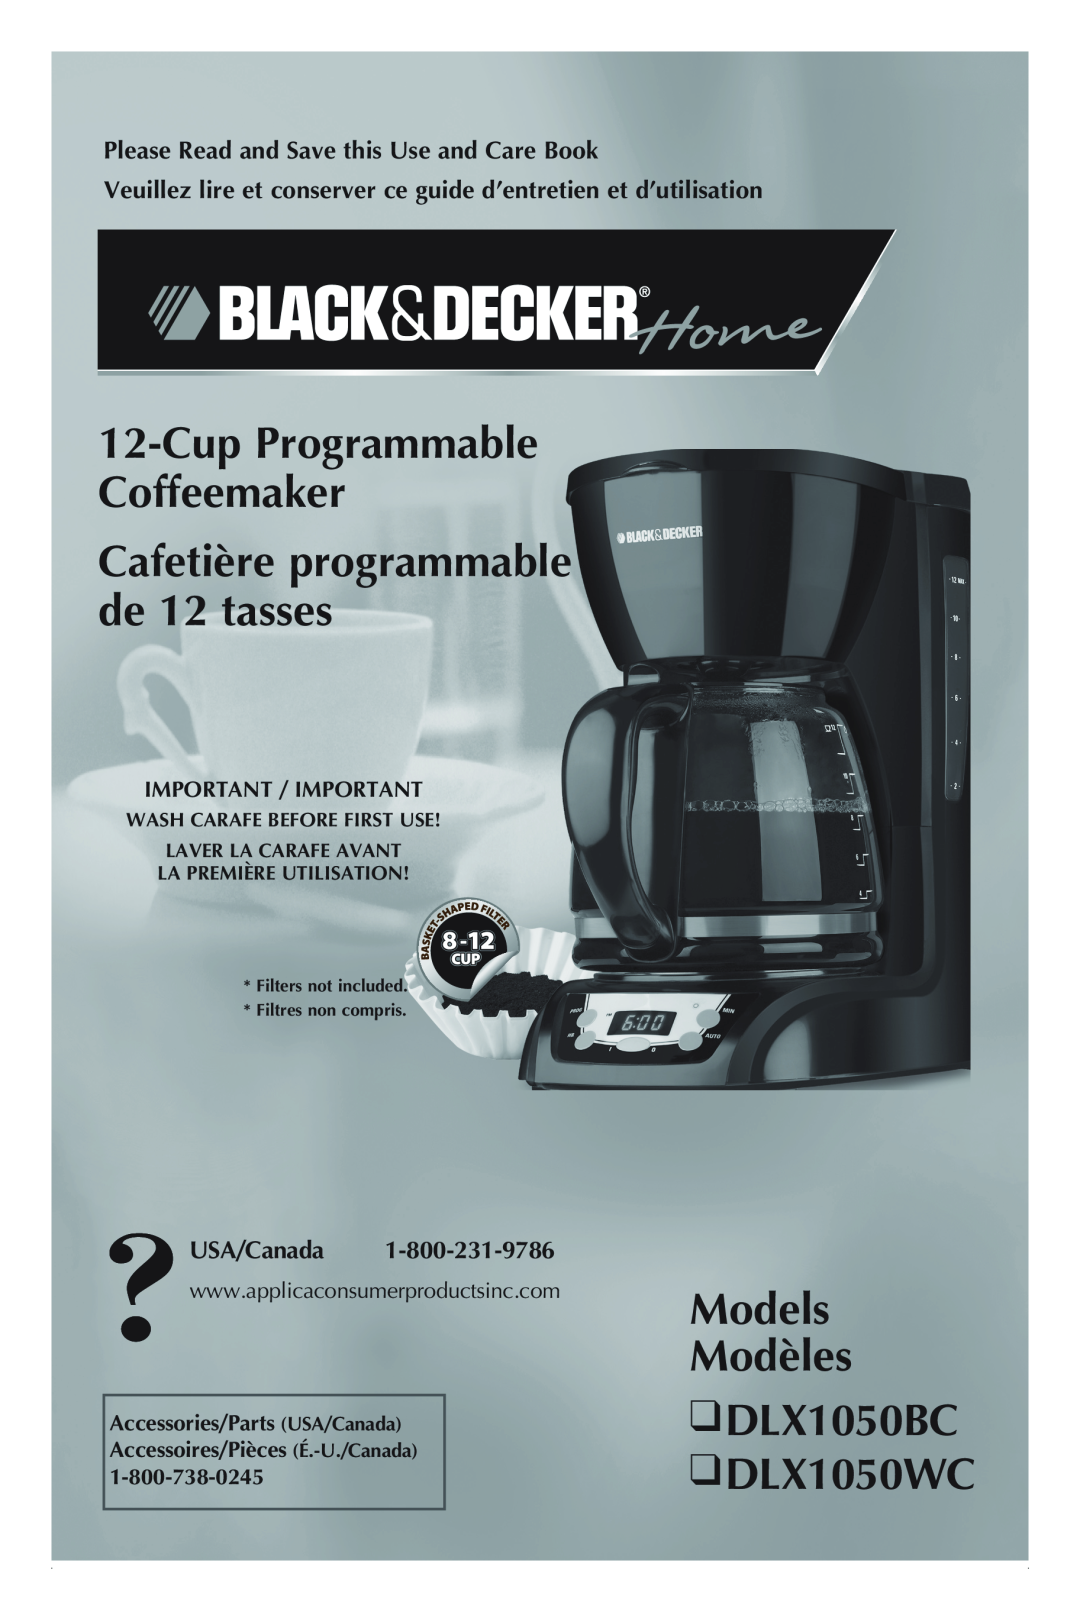 Black & Decker manual Models Modèles DLX1050BC DLX1050WC, Please Read and Save this Use and Care Book, USA/Canada 